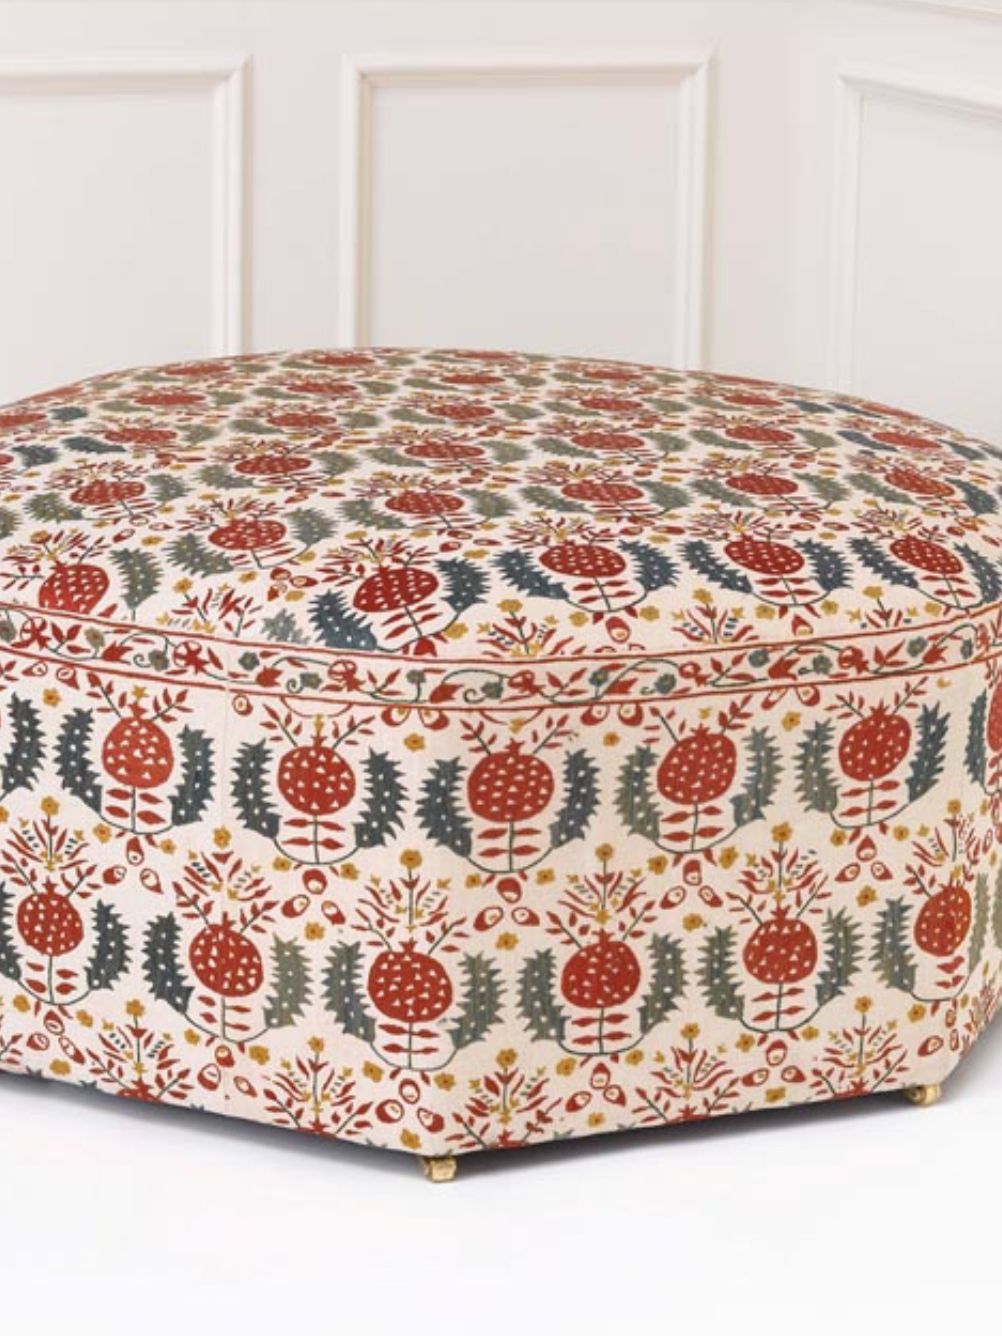 21 Best Ottomans And Footstools | House & Garden With Regard To Ottomans With Stool (View 8 of 15)